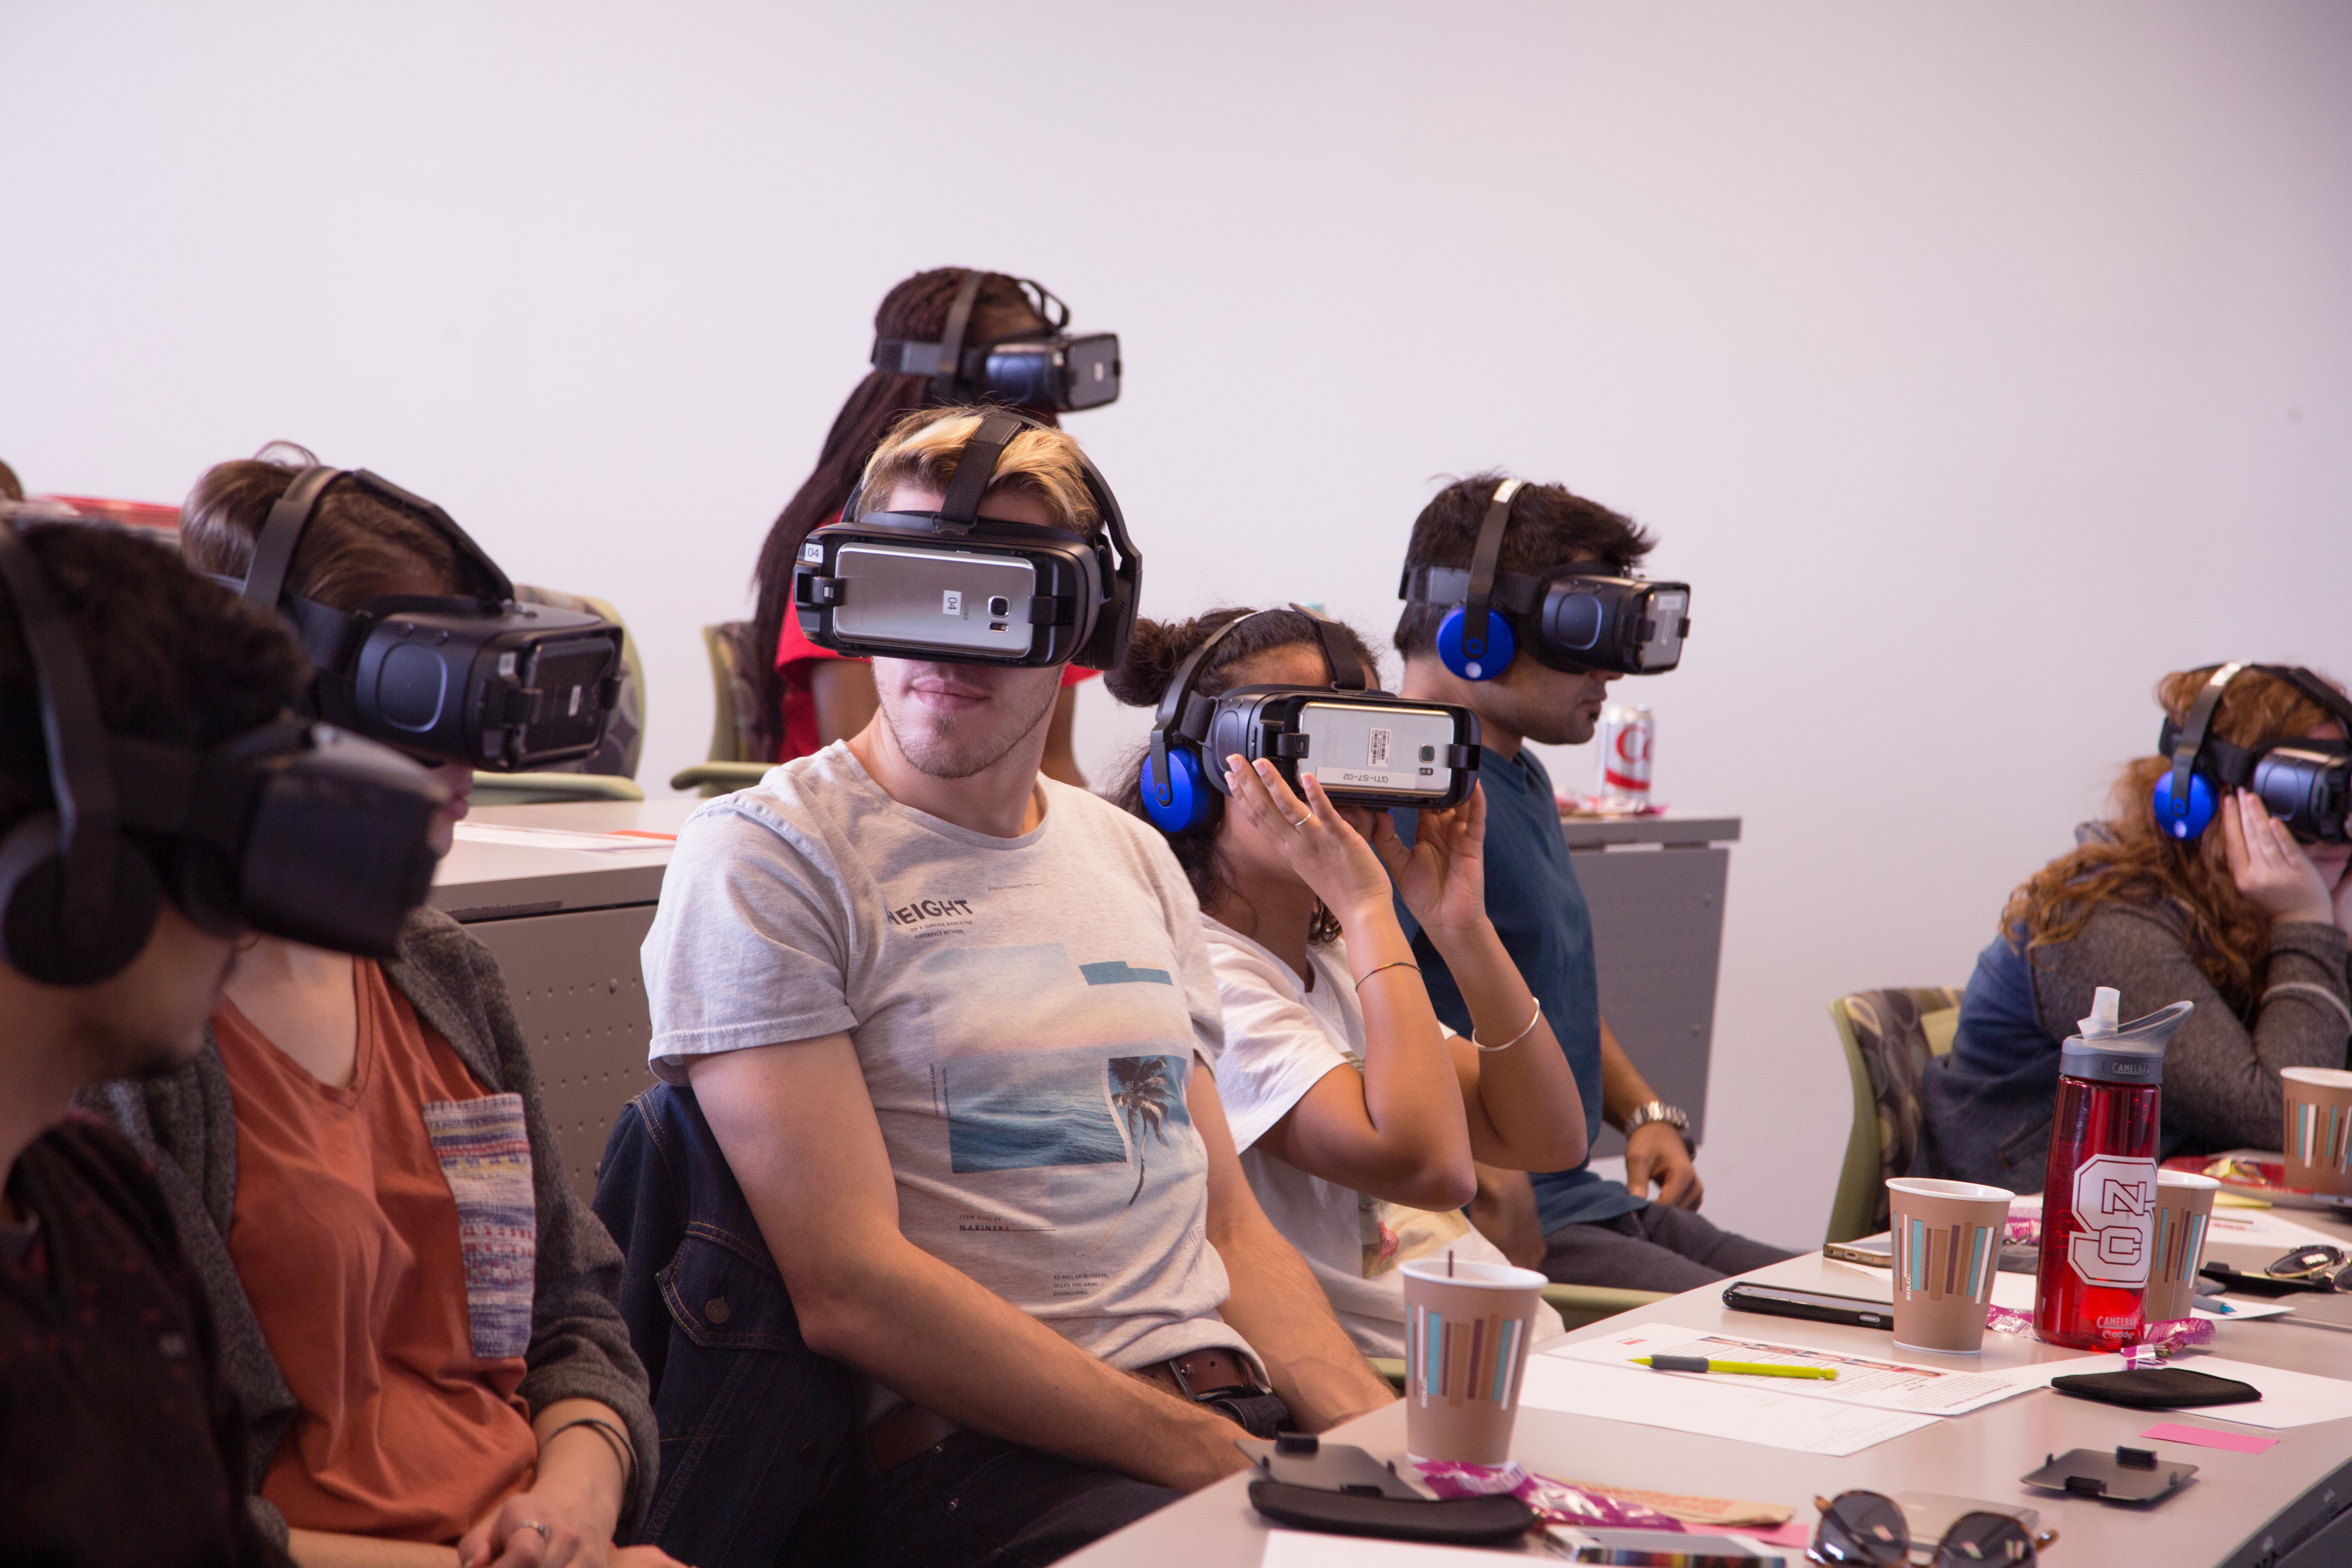 Students in VR headsets